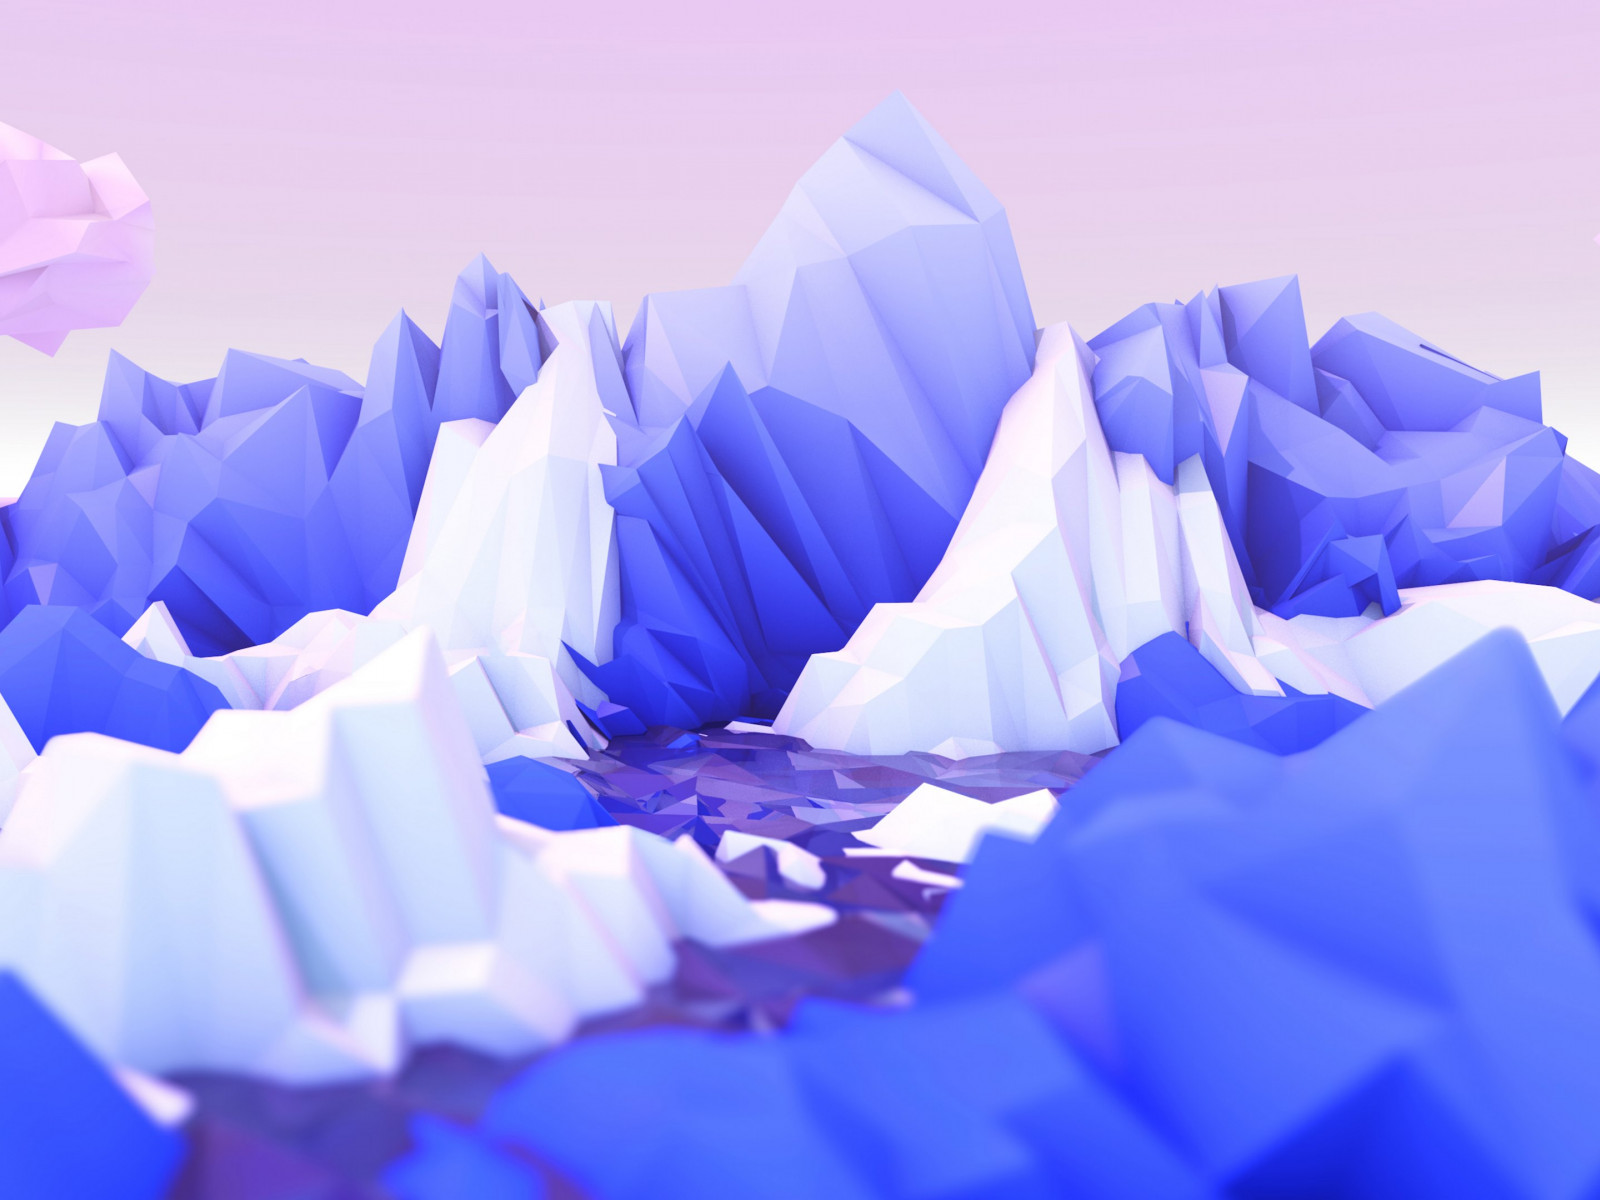 Low poly graphic design wallpaper 1600x1200